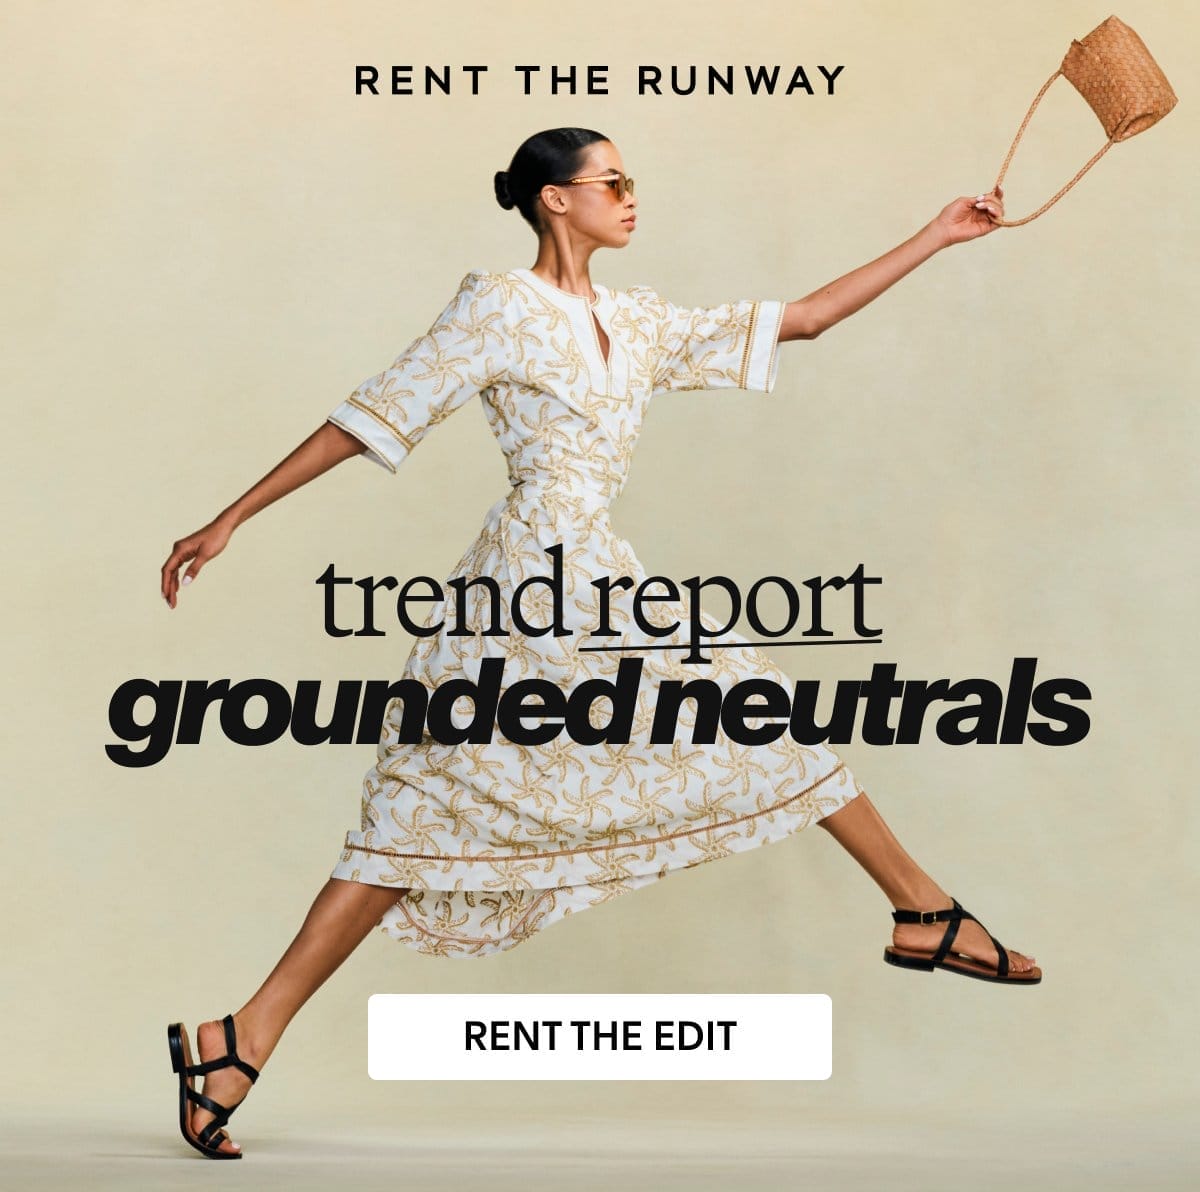 Trend report: grounded neutrals